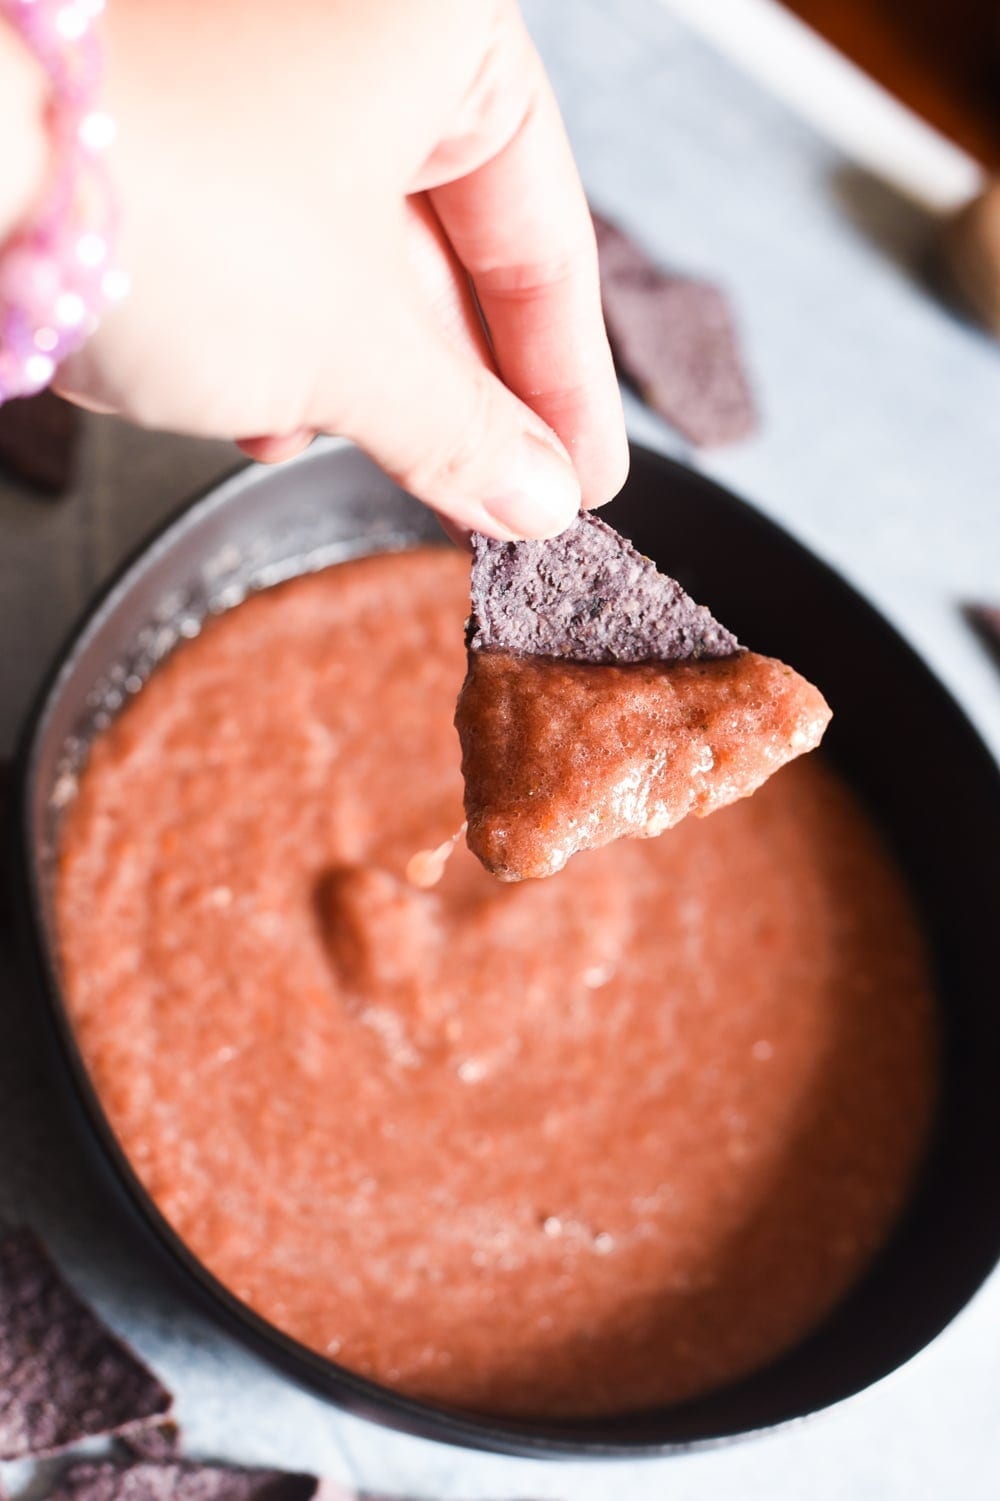 How to Make Salsa in a Blender